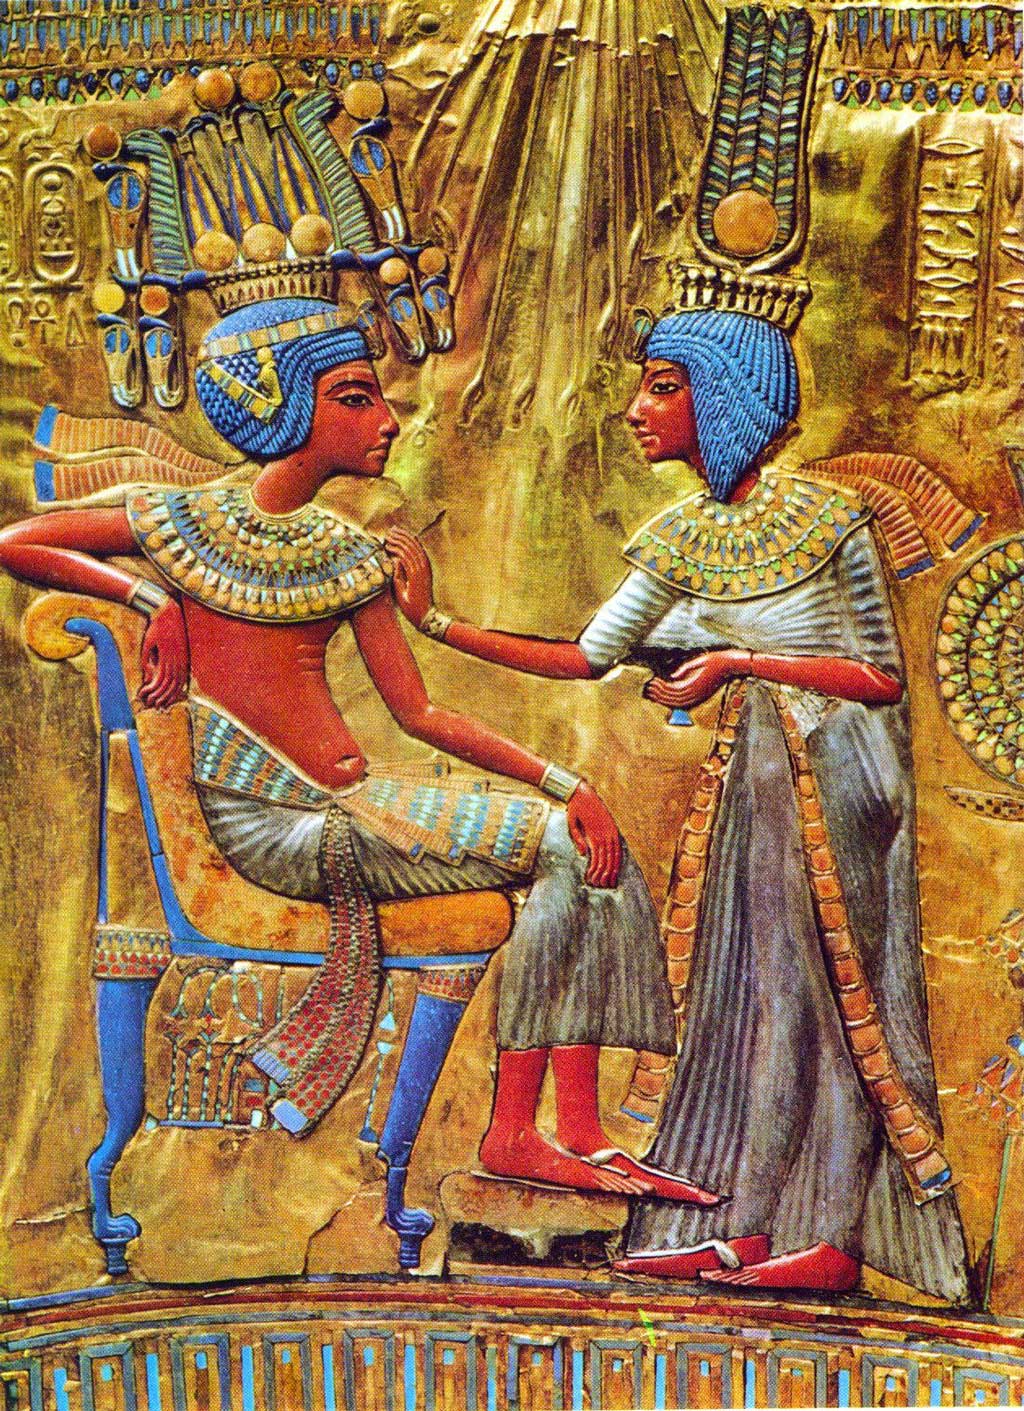 The image comes from the gold-plated throne of Tutankhamun. It depicts the king seated on a couch while his wife, Ankhsenamun, stands before him, touching his shoulder. Both figures are vibrantly colored with umber skin, indigo hair, and grayish-white garments.